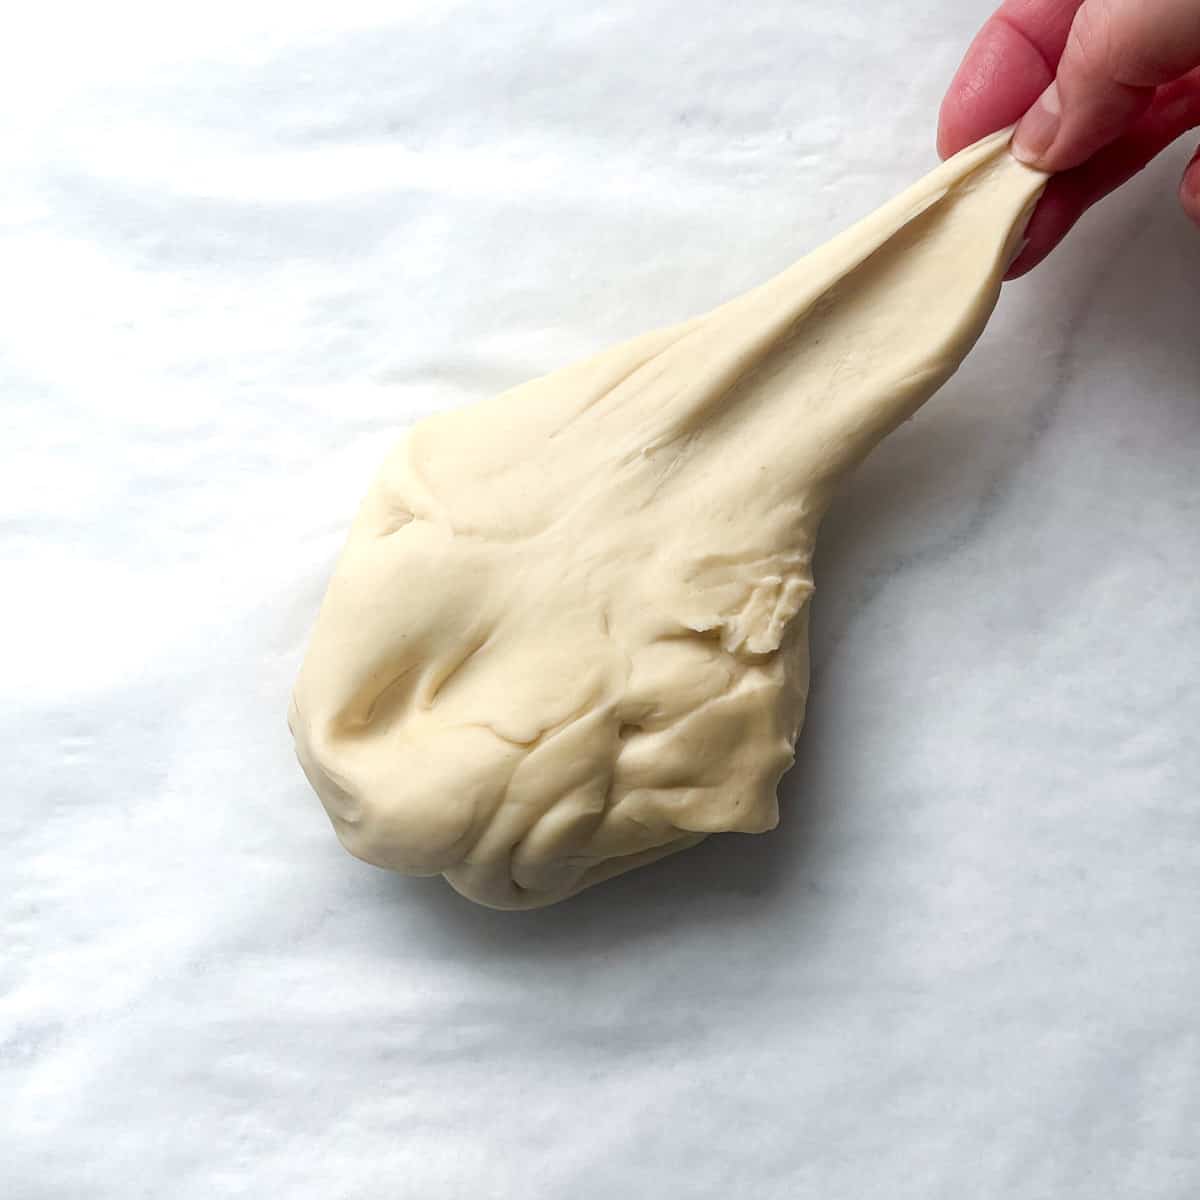 Flammkuchen dough being stretched to demonstrate elasticity.